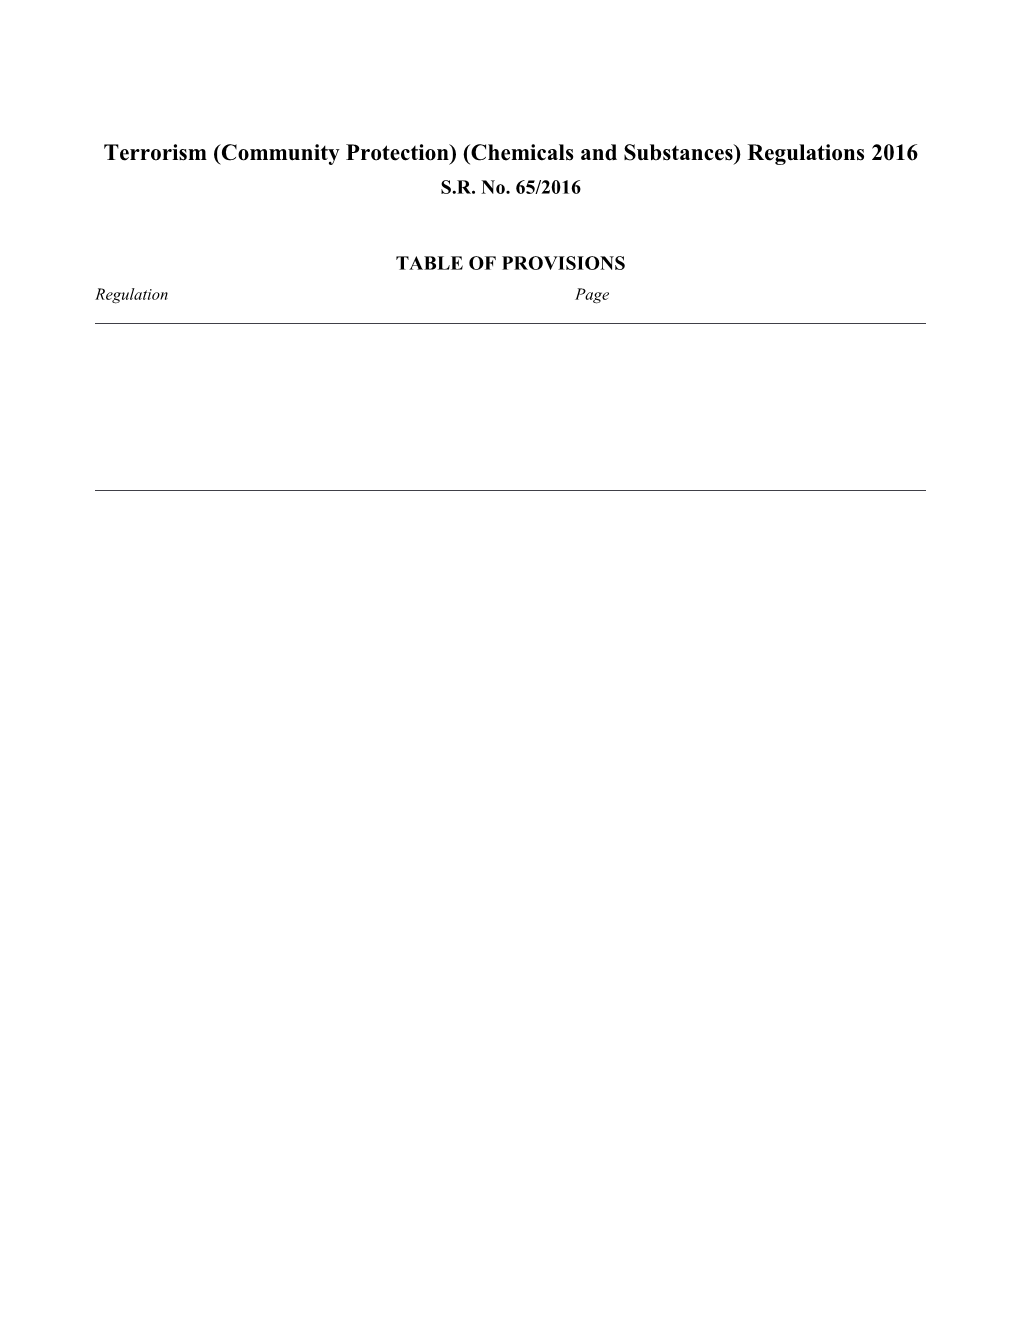 Terrorism (Community Protection) (Chemicals and Substances) Regulations 2016